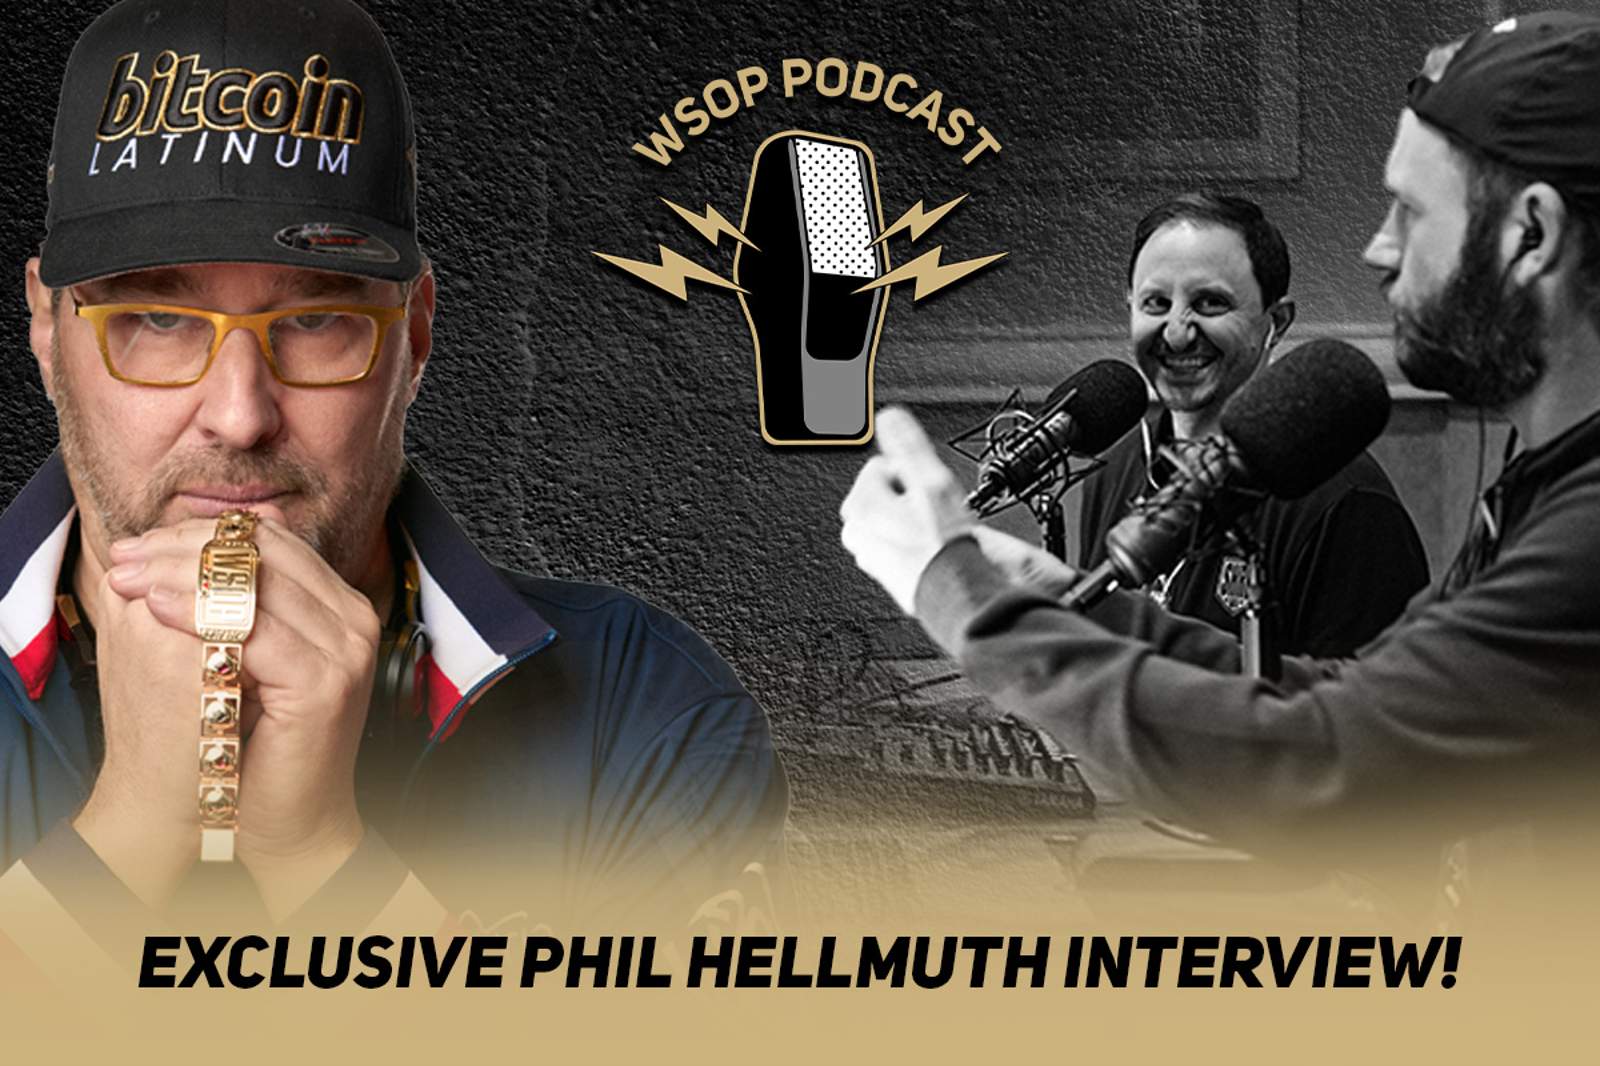 PokerGO WSOP Podcast: Very Special Phil Hellmuth Interview About Winning His 16th Gold Bracelet!